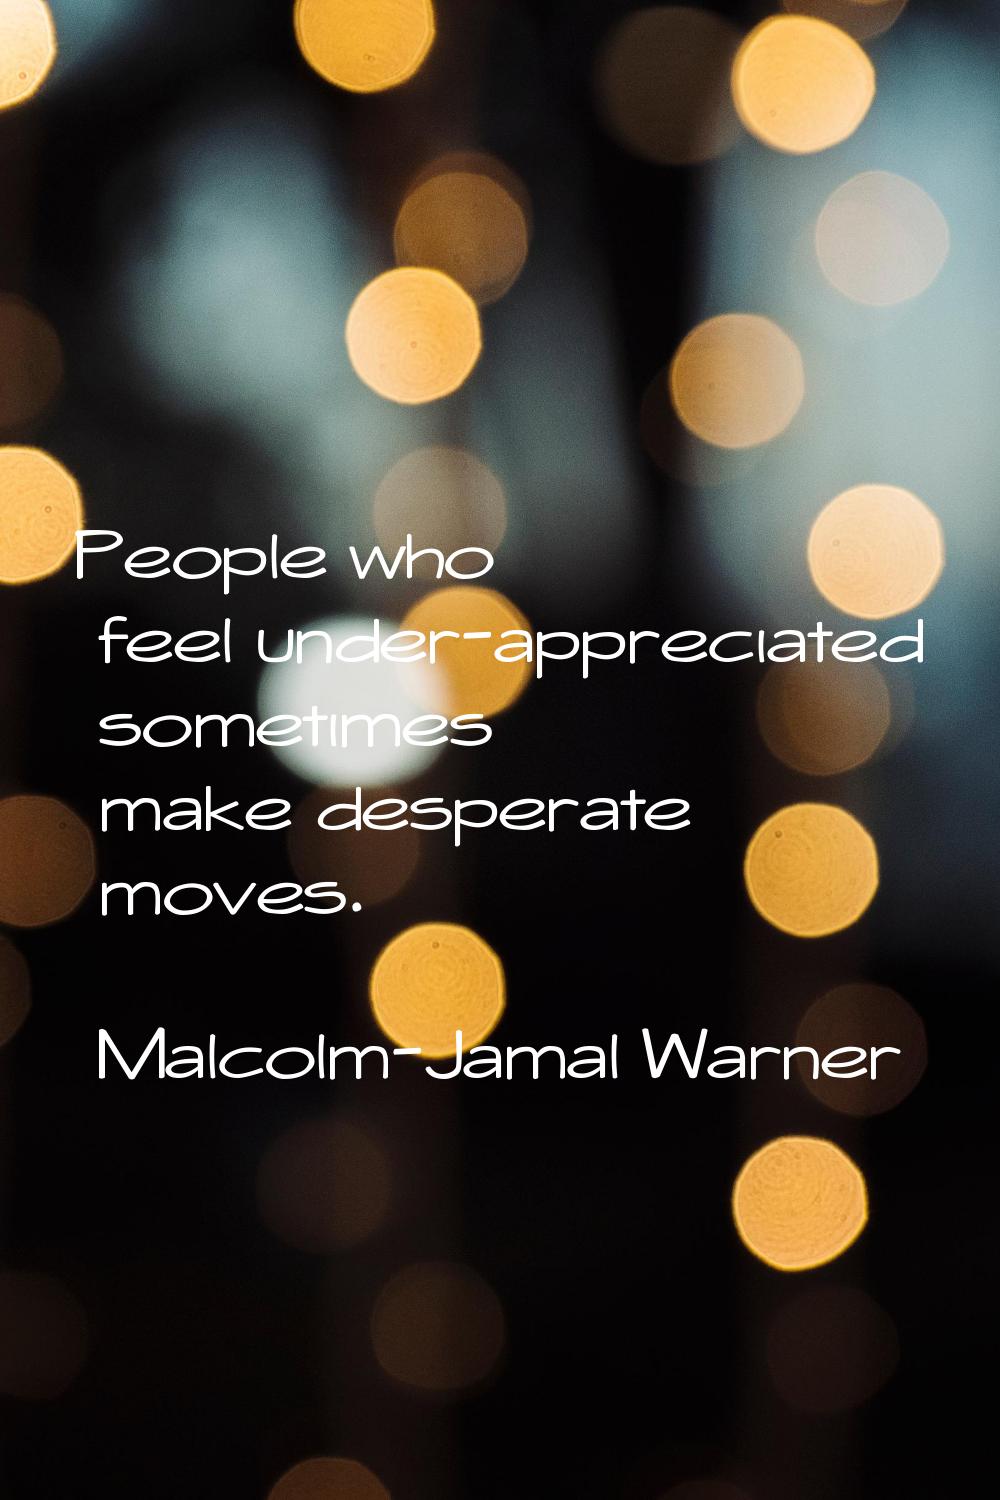 People who feel under-appreciated sometimes make desperate moves.